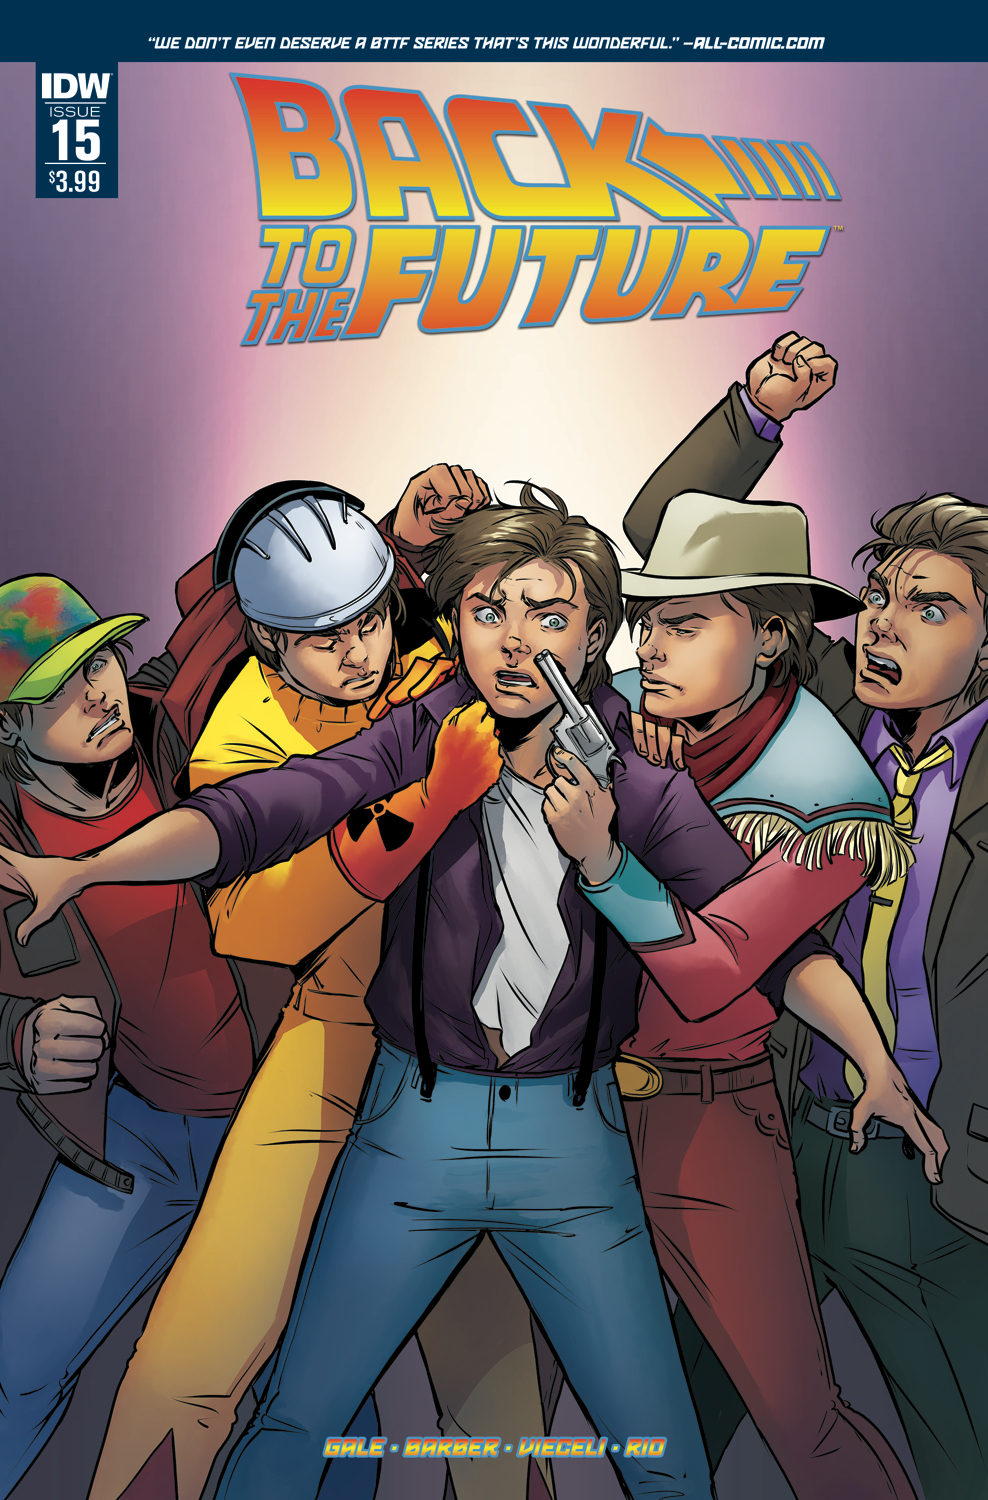 BACK TO THE FUTURE #15